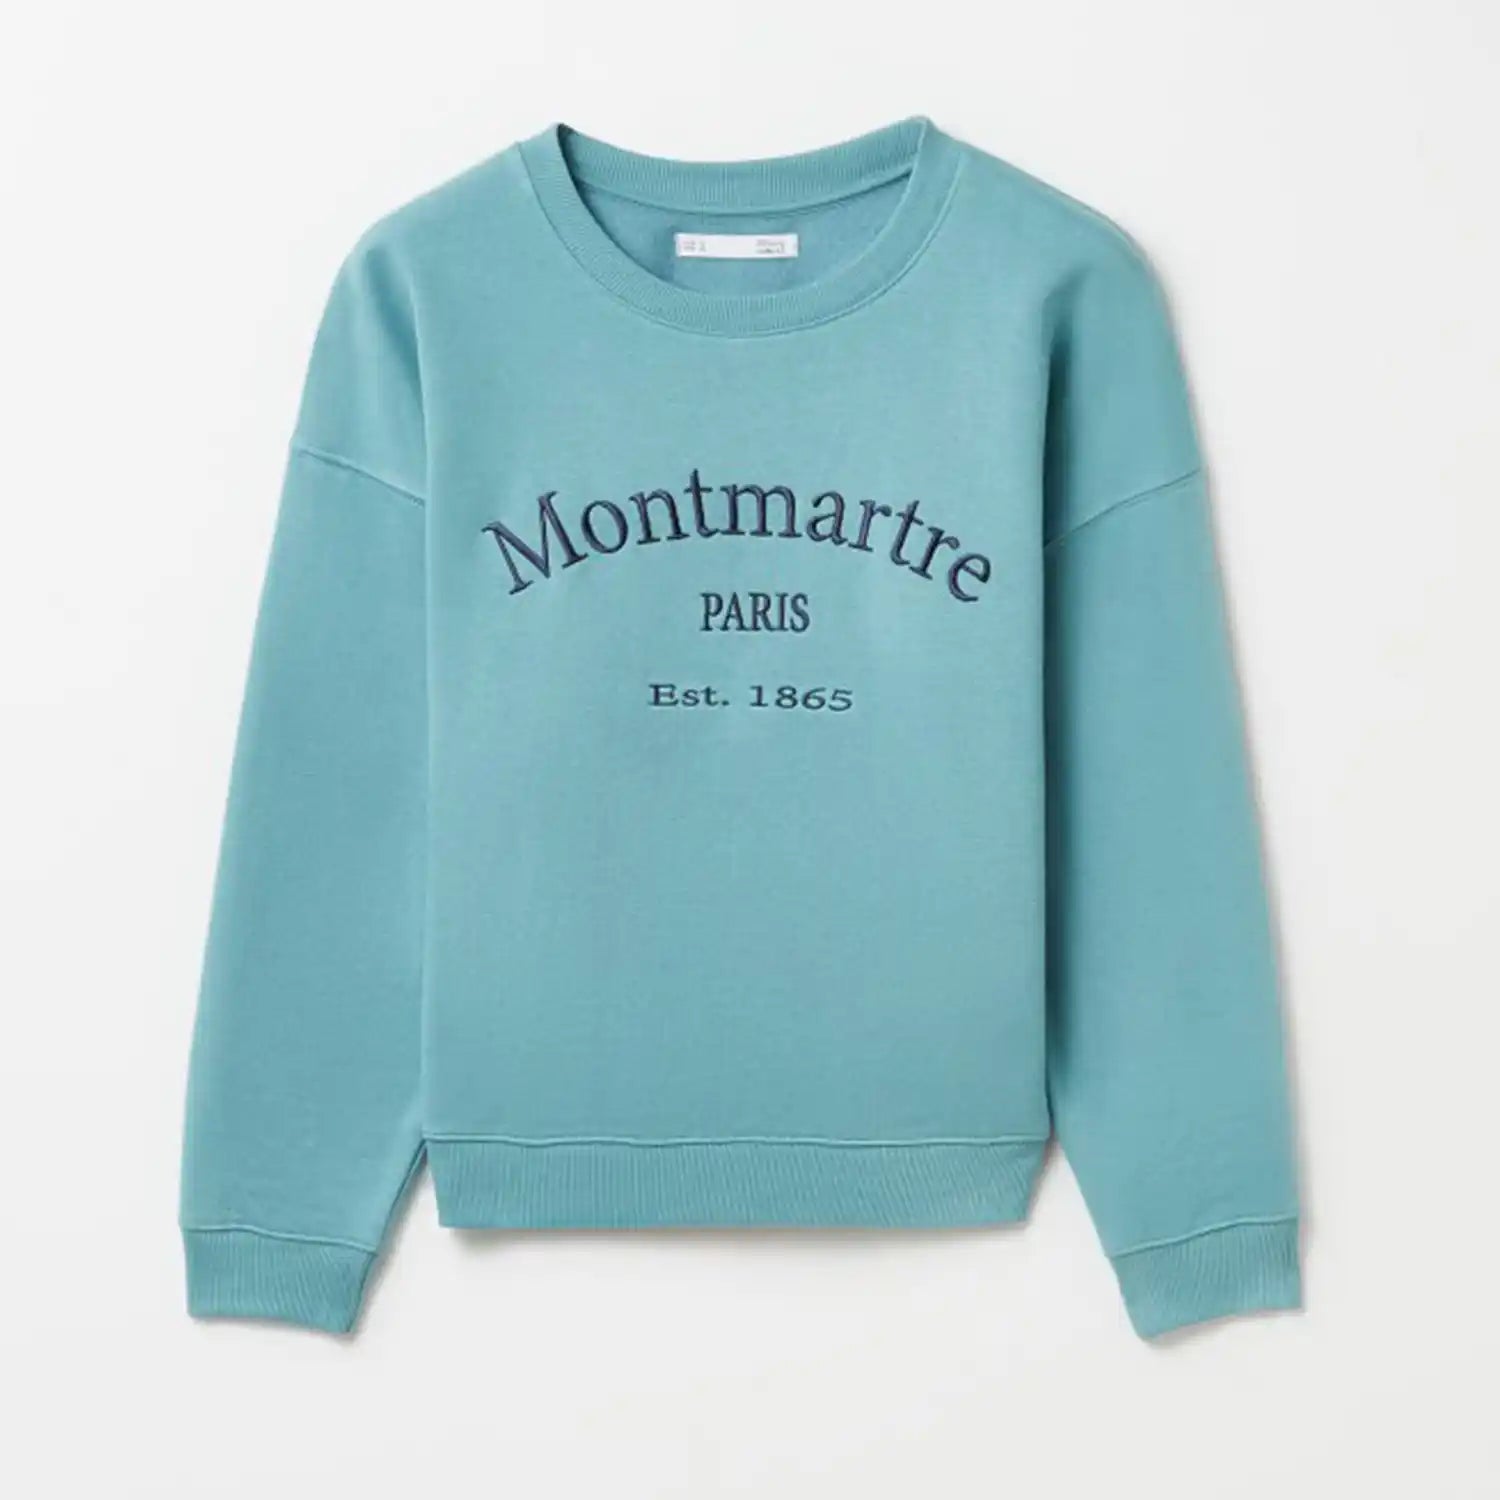 Sfera Embroidered Sweatshirt - Teal 1 Shaws Department Stores